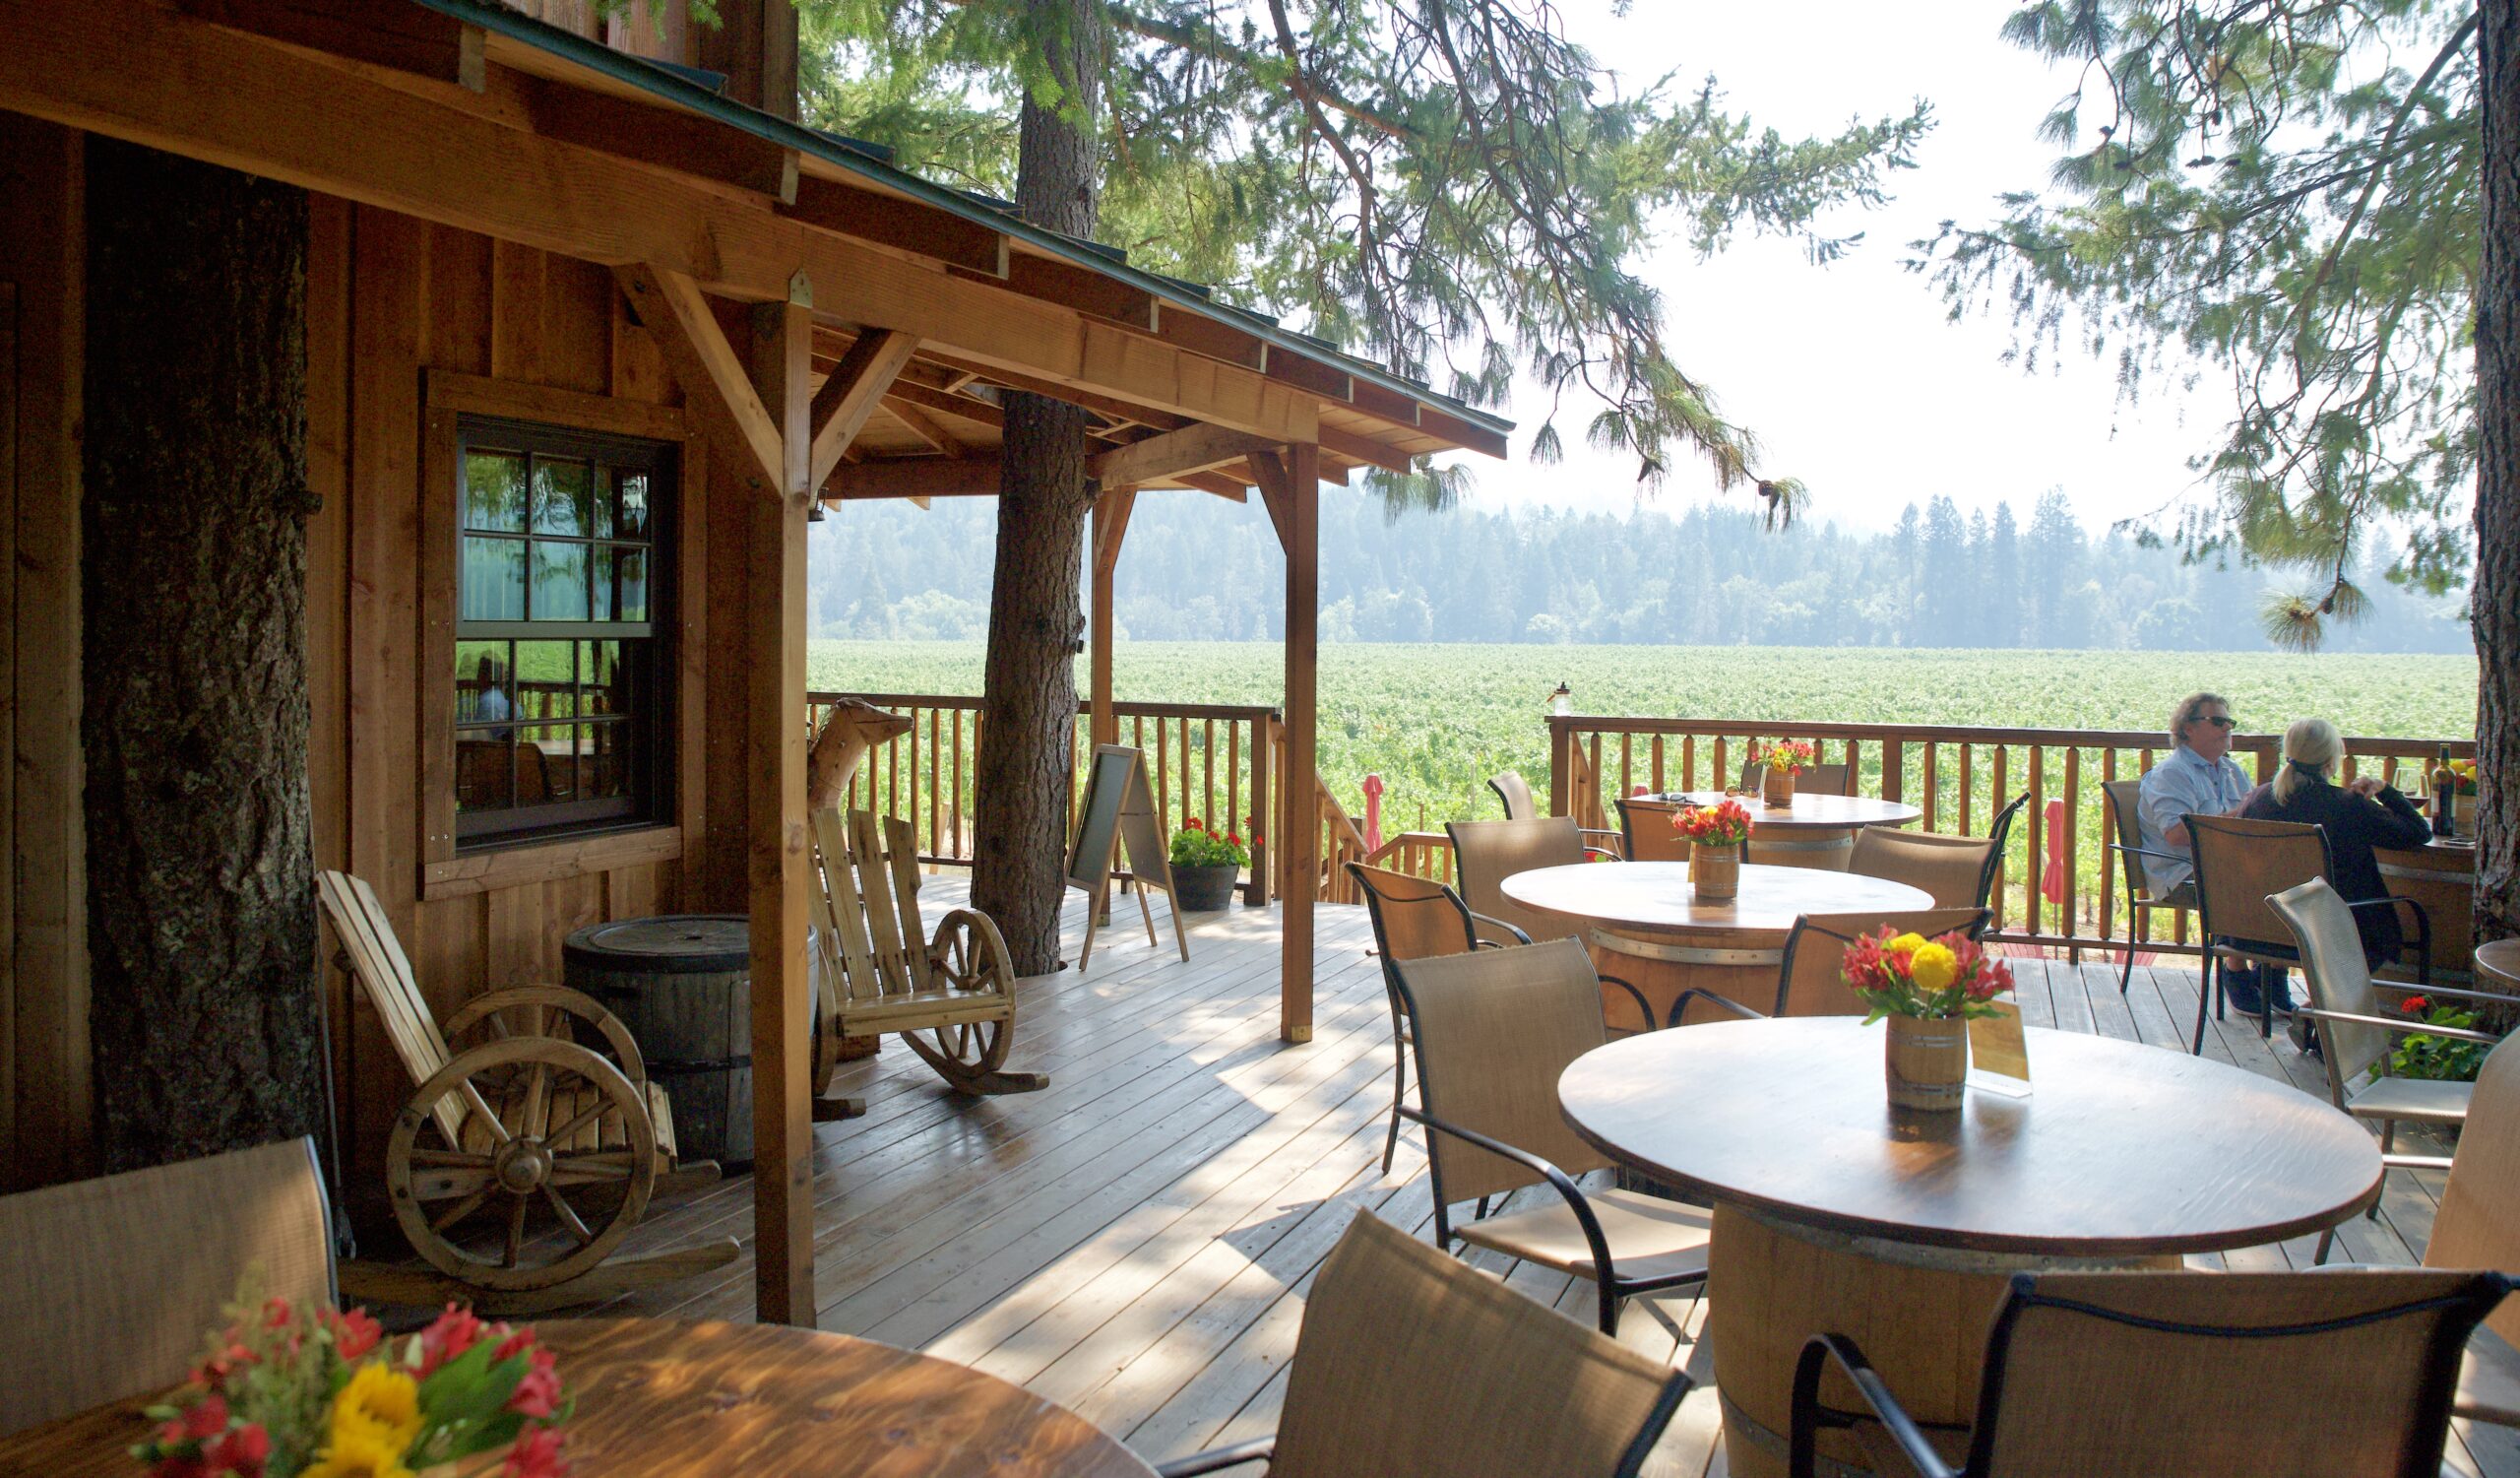 A couple sits on a vineyard patio that wraps around a nice cabin, there are old western chairs, and the patio is built around the trees.